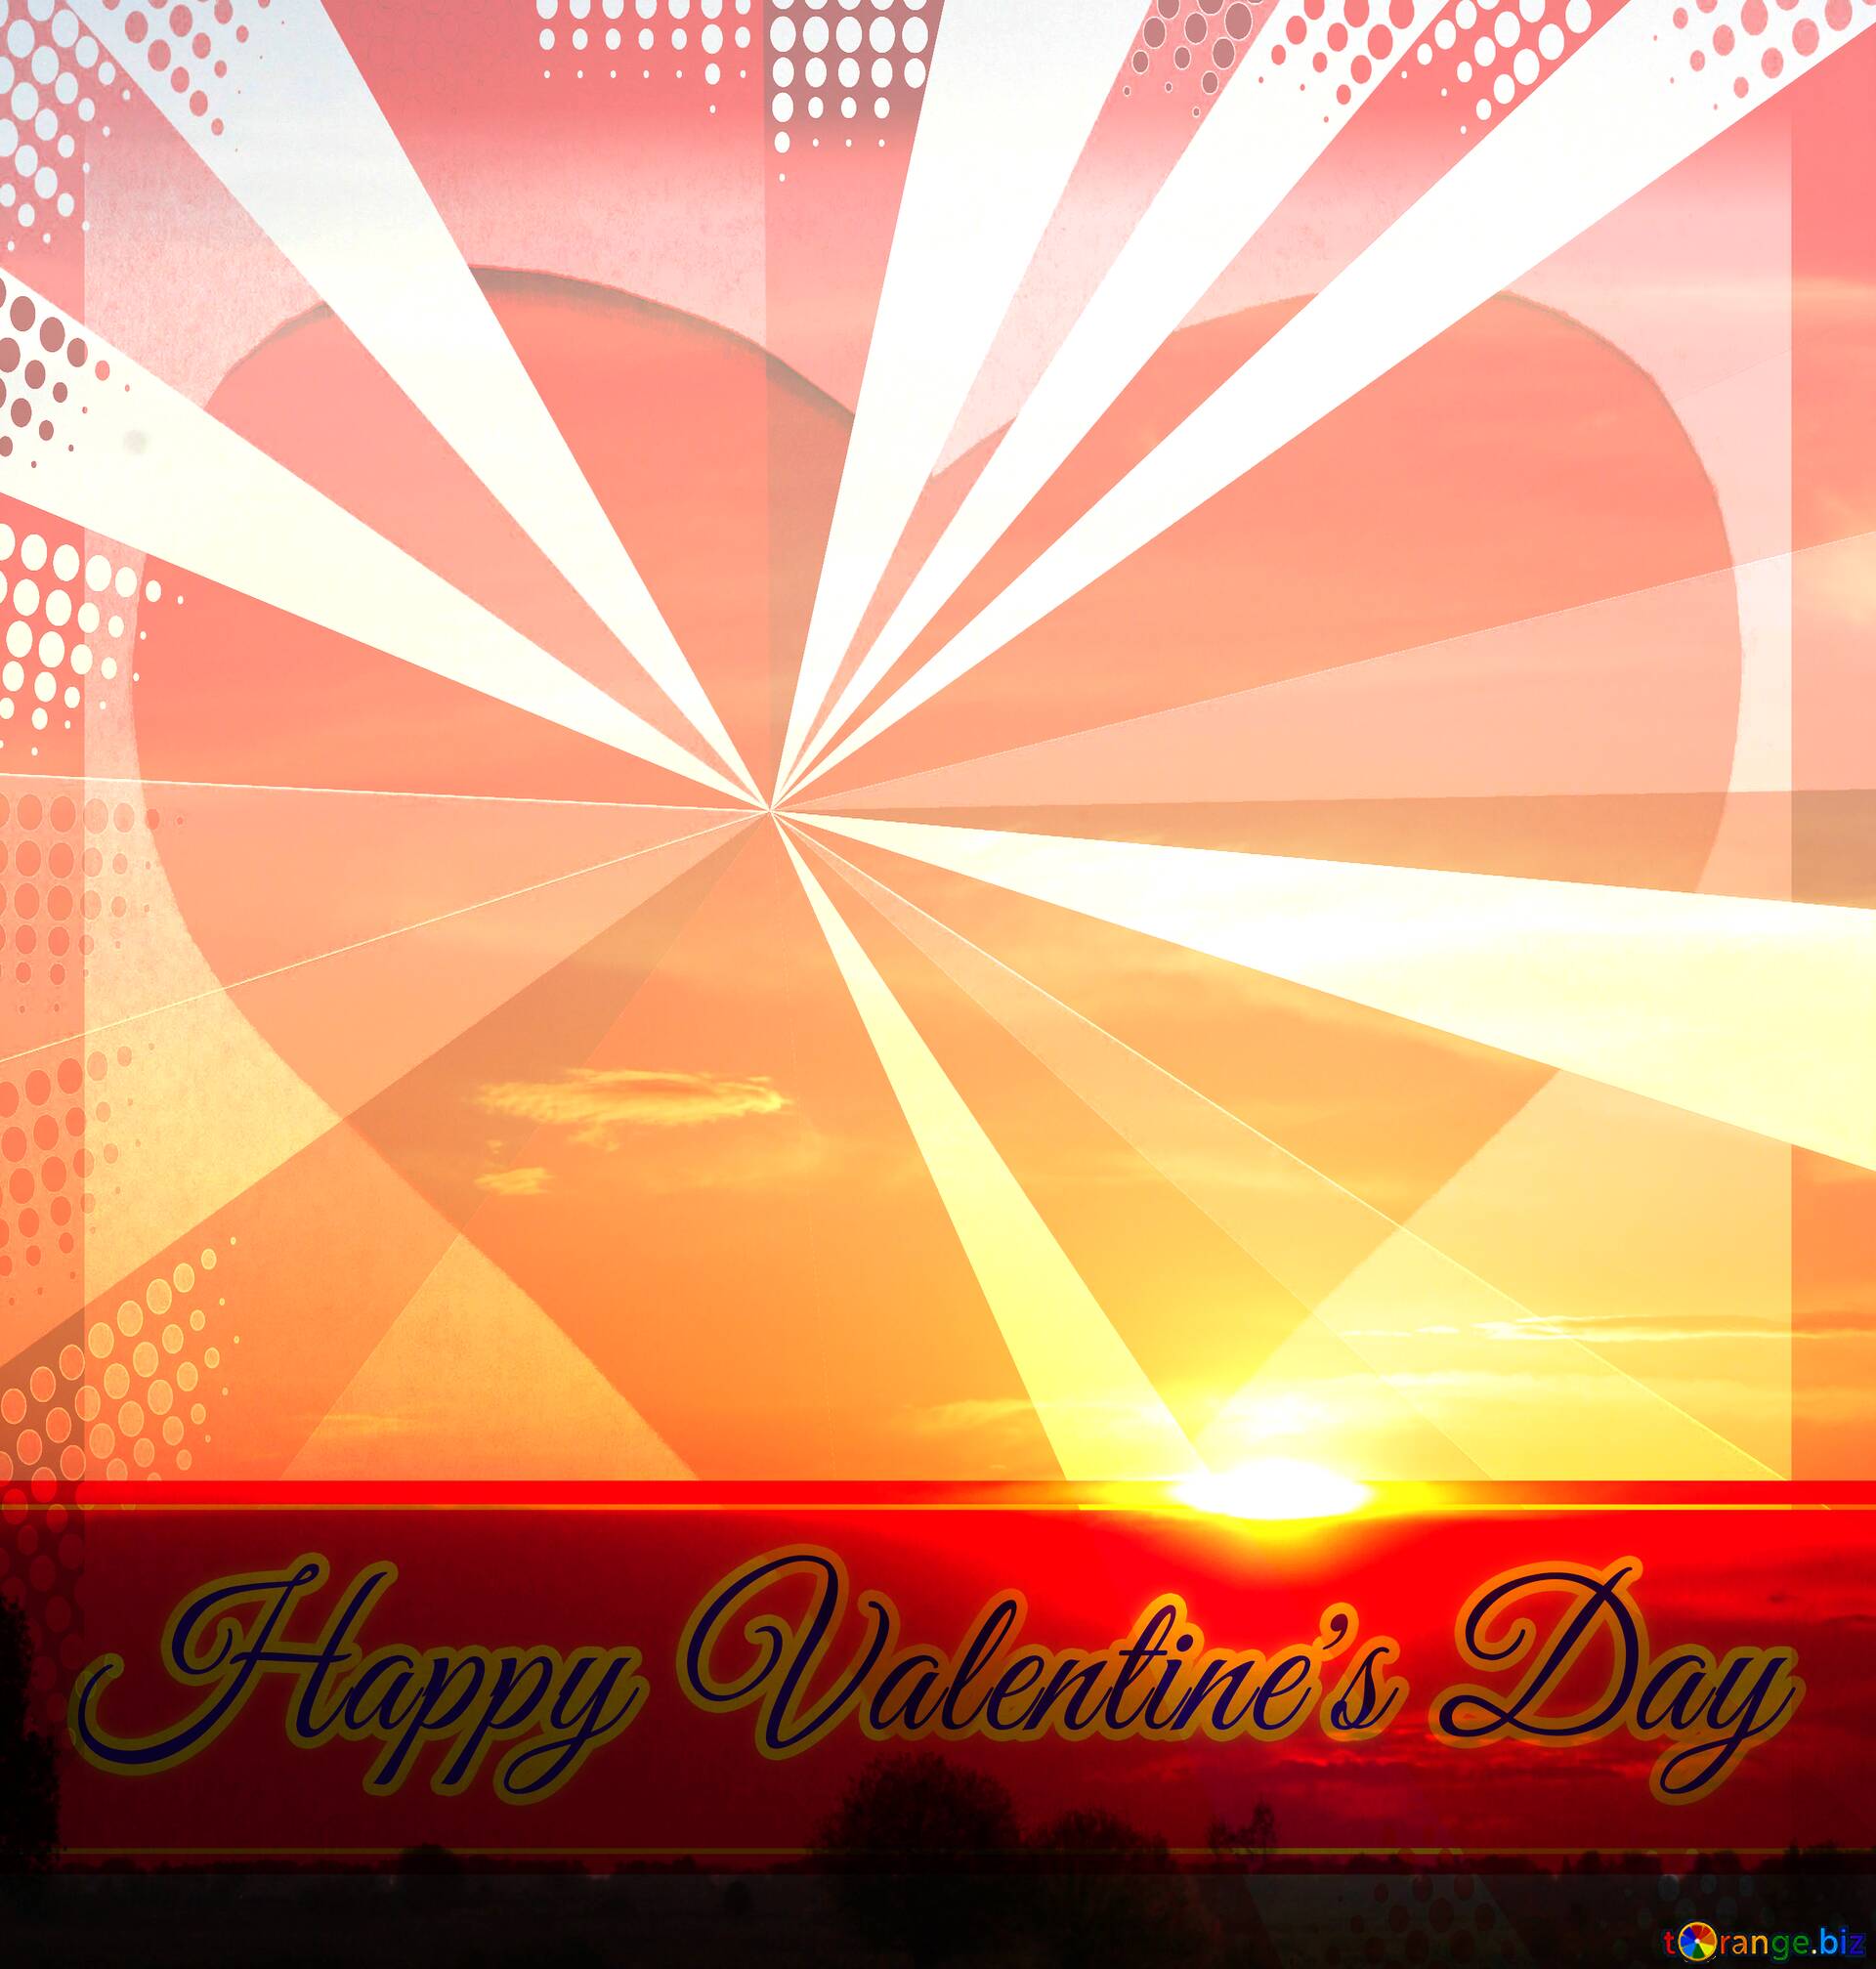 Download free picture Happy Valentine's Day Background for congratulations  card on CC-BY License ~ Free Image Stock  ~ fx №176395